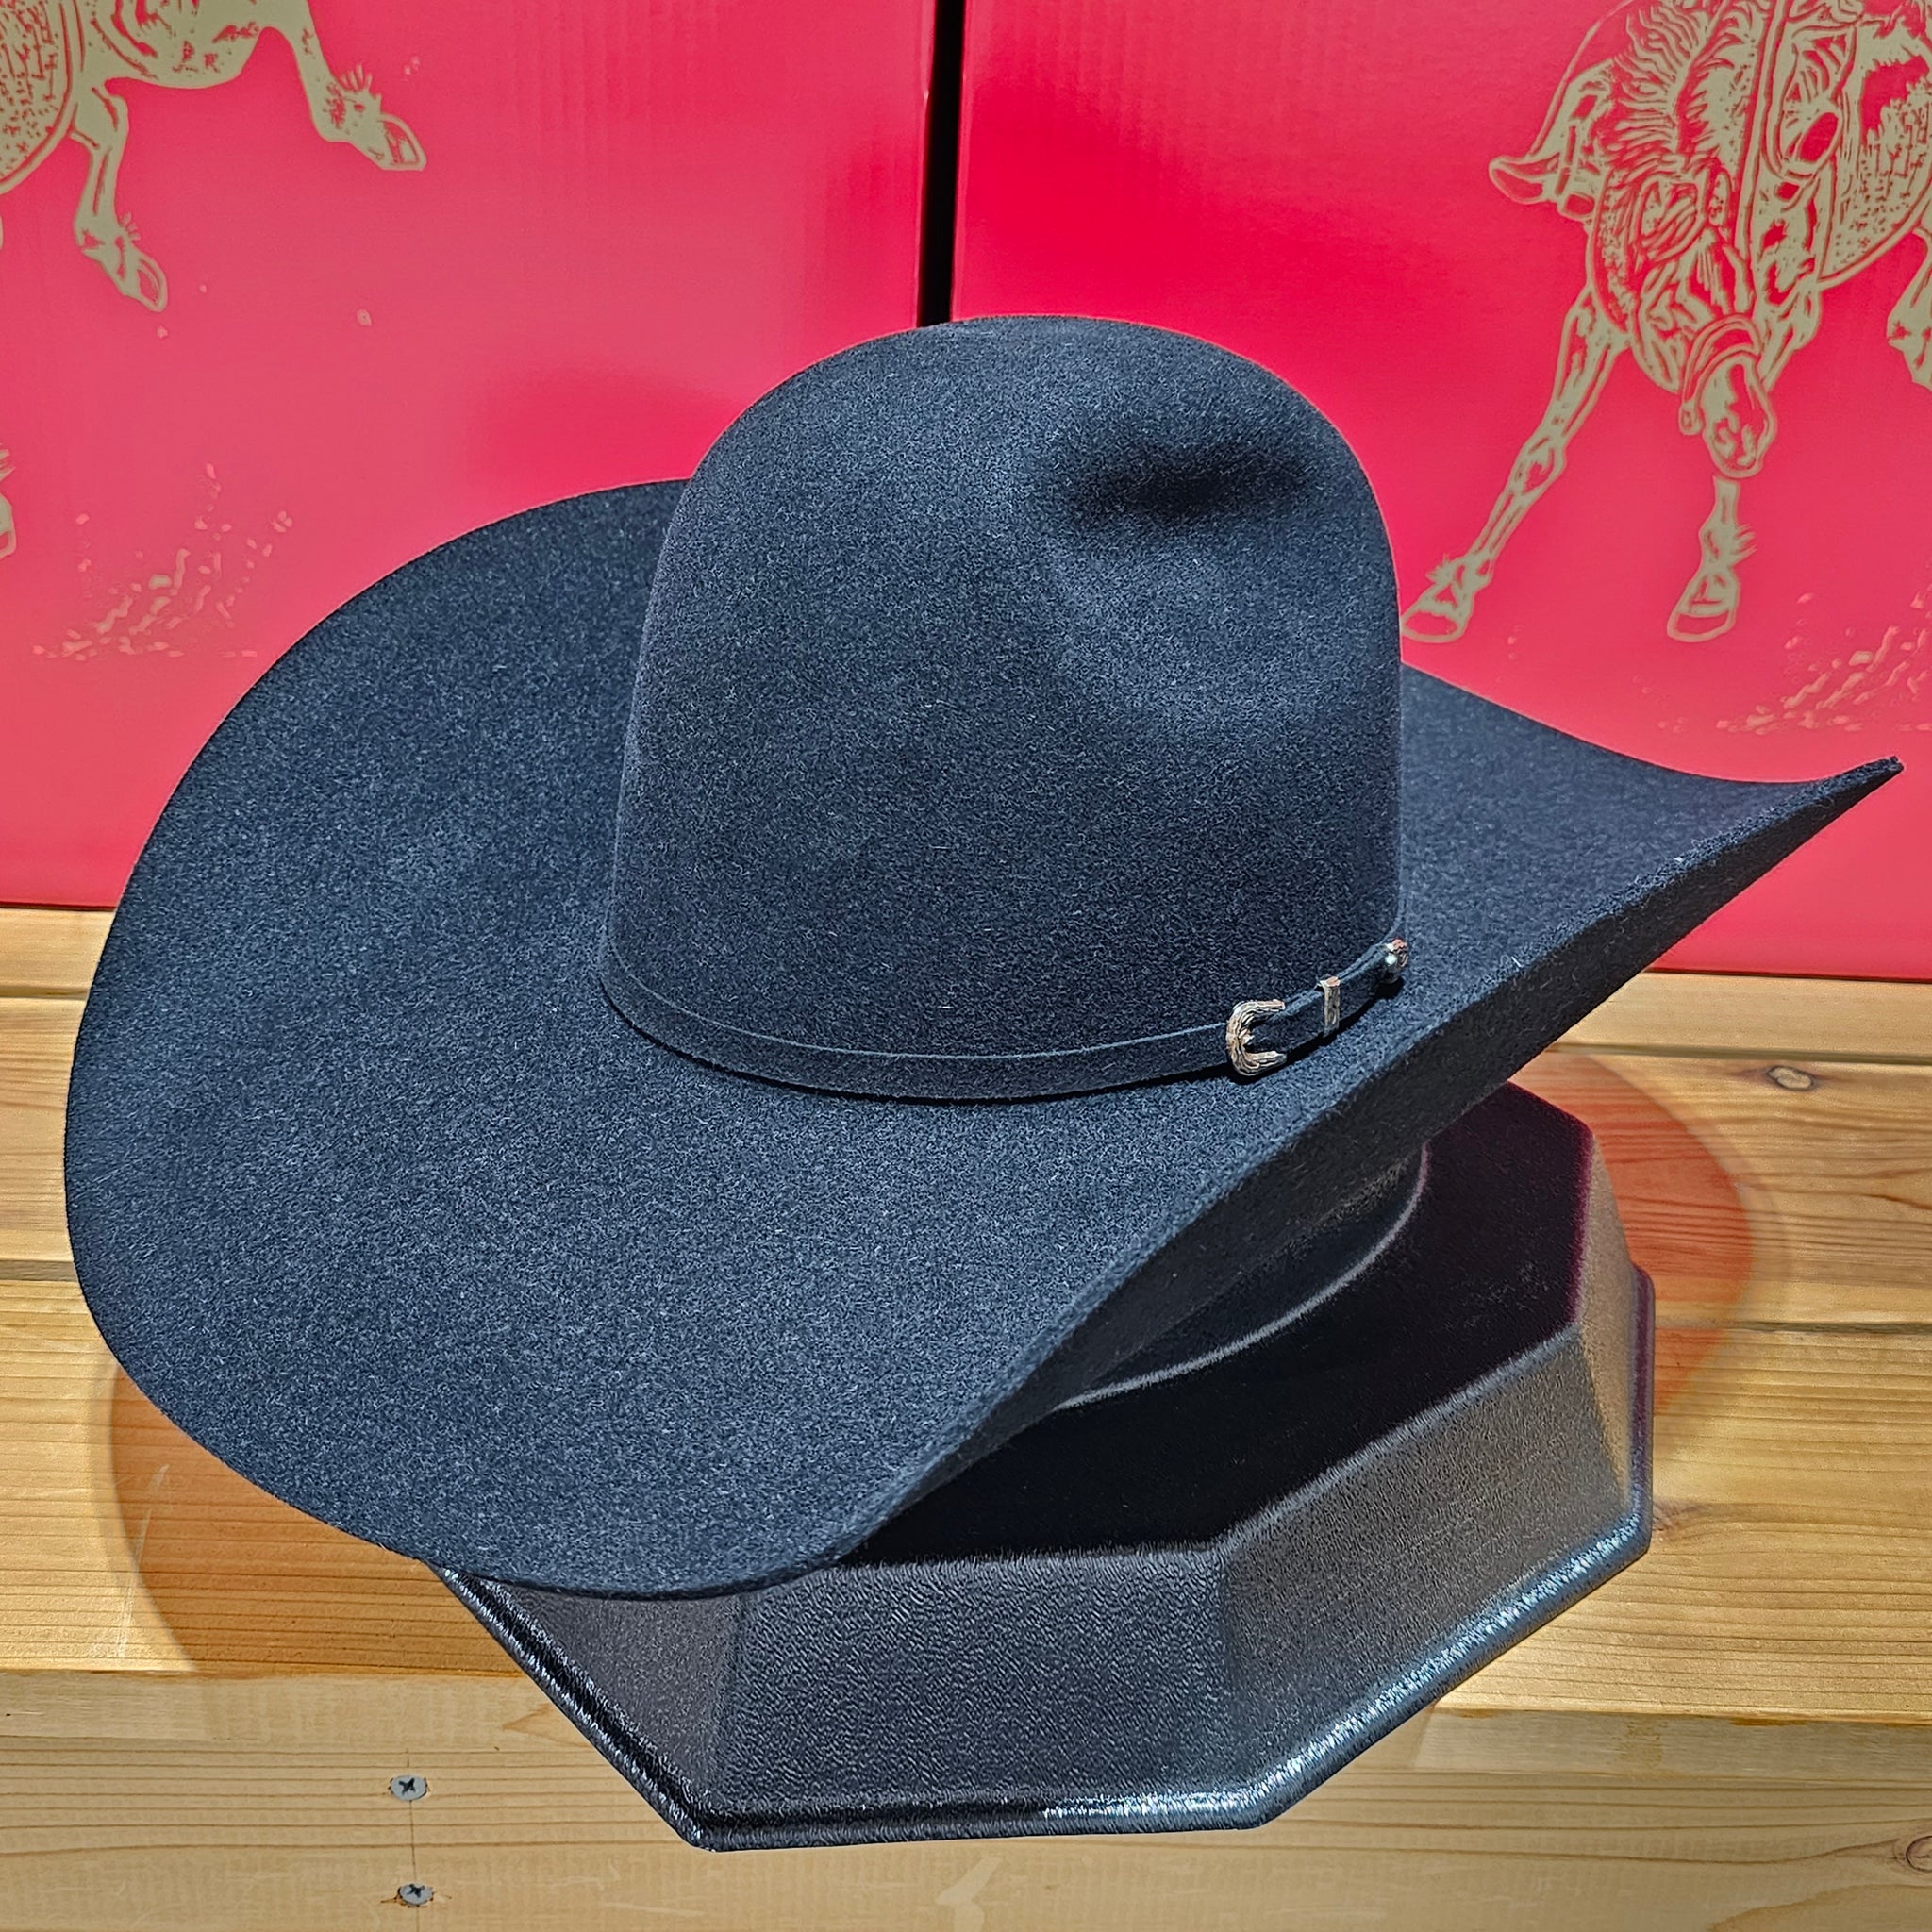 hat shaper products for sale